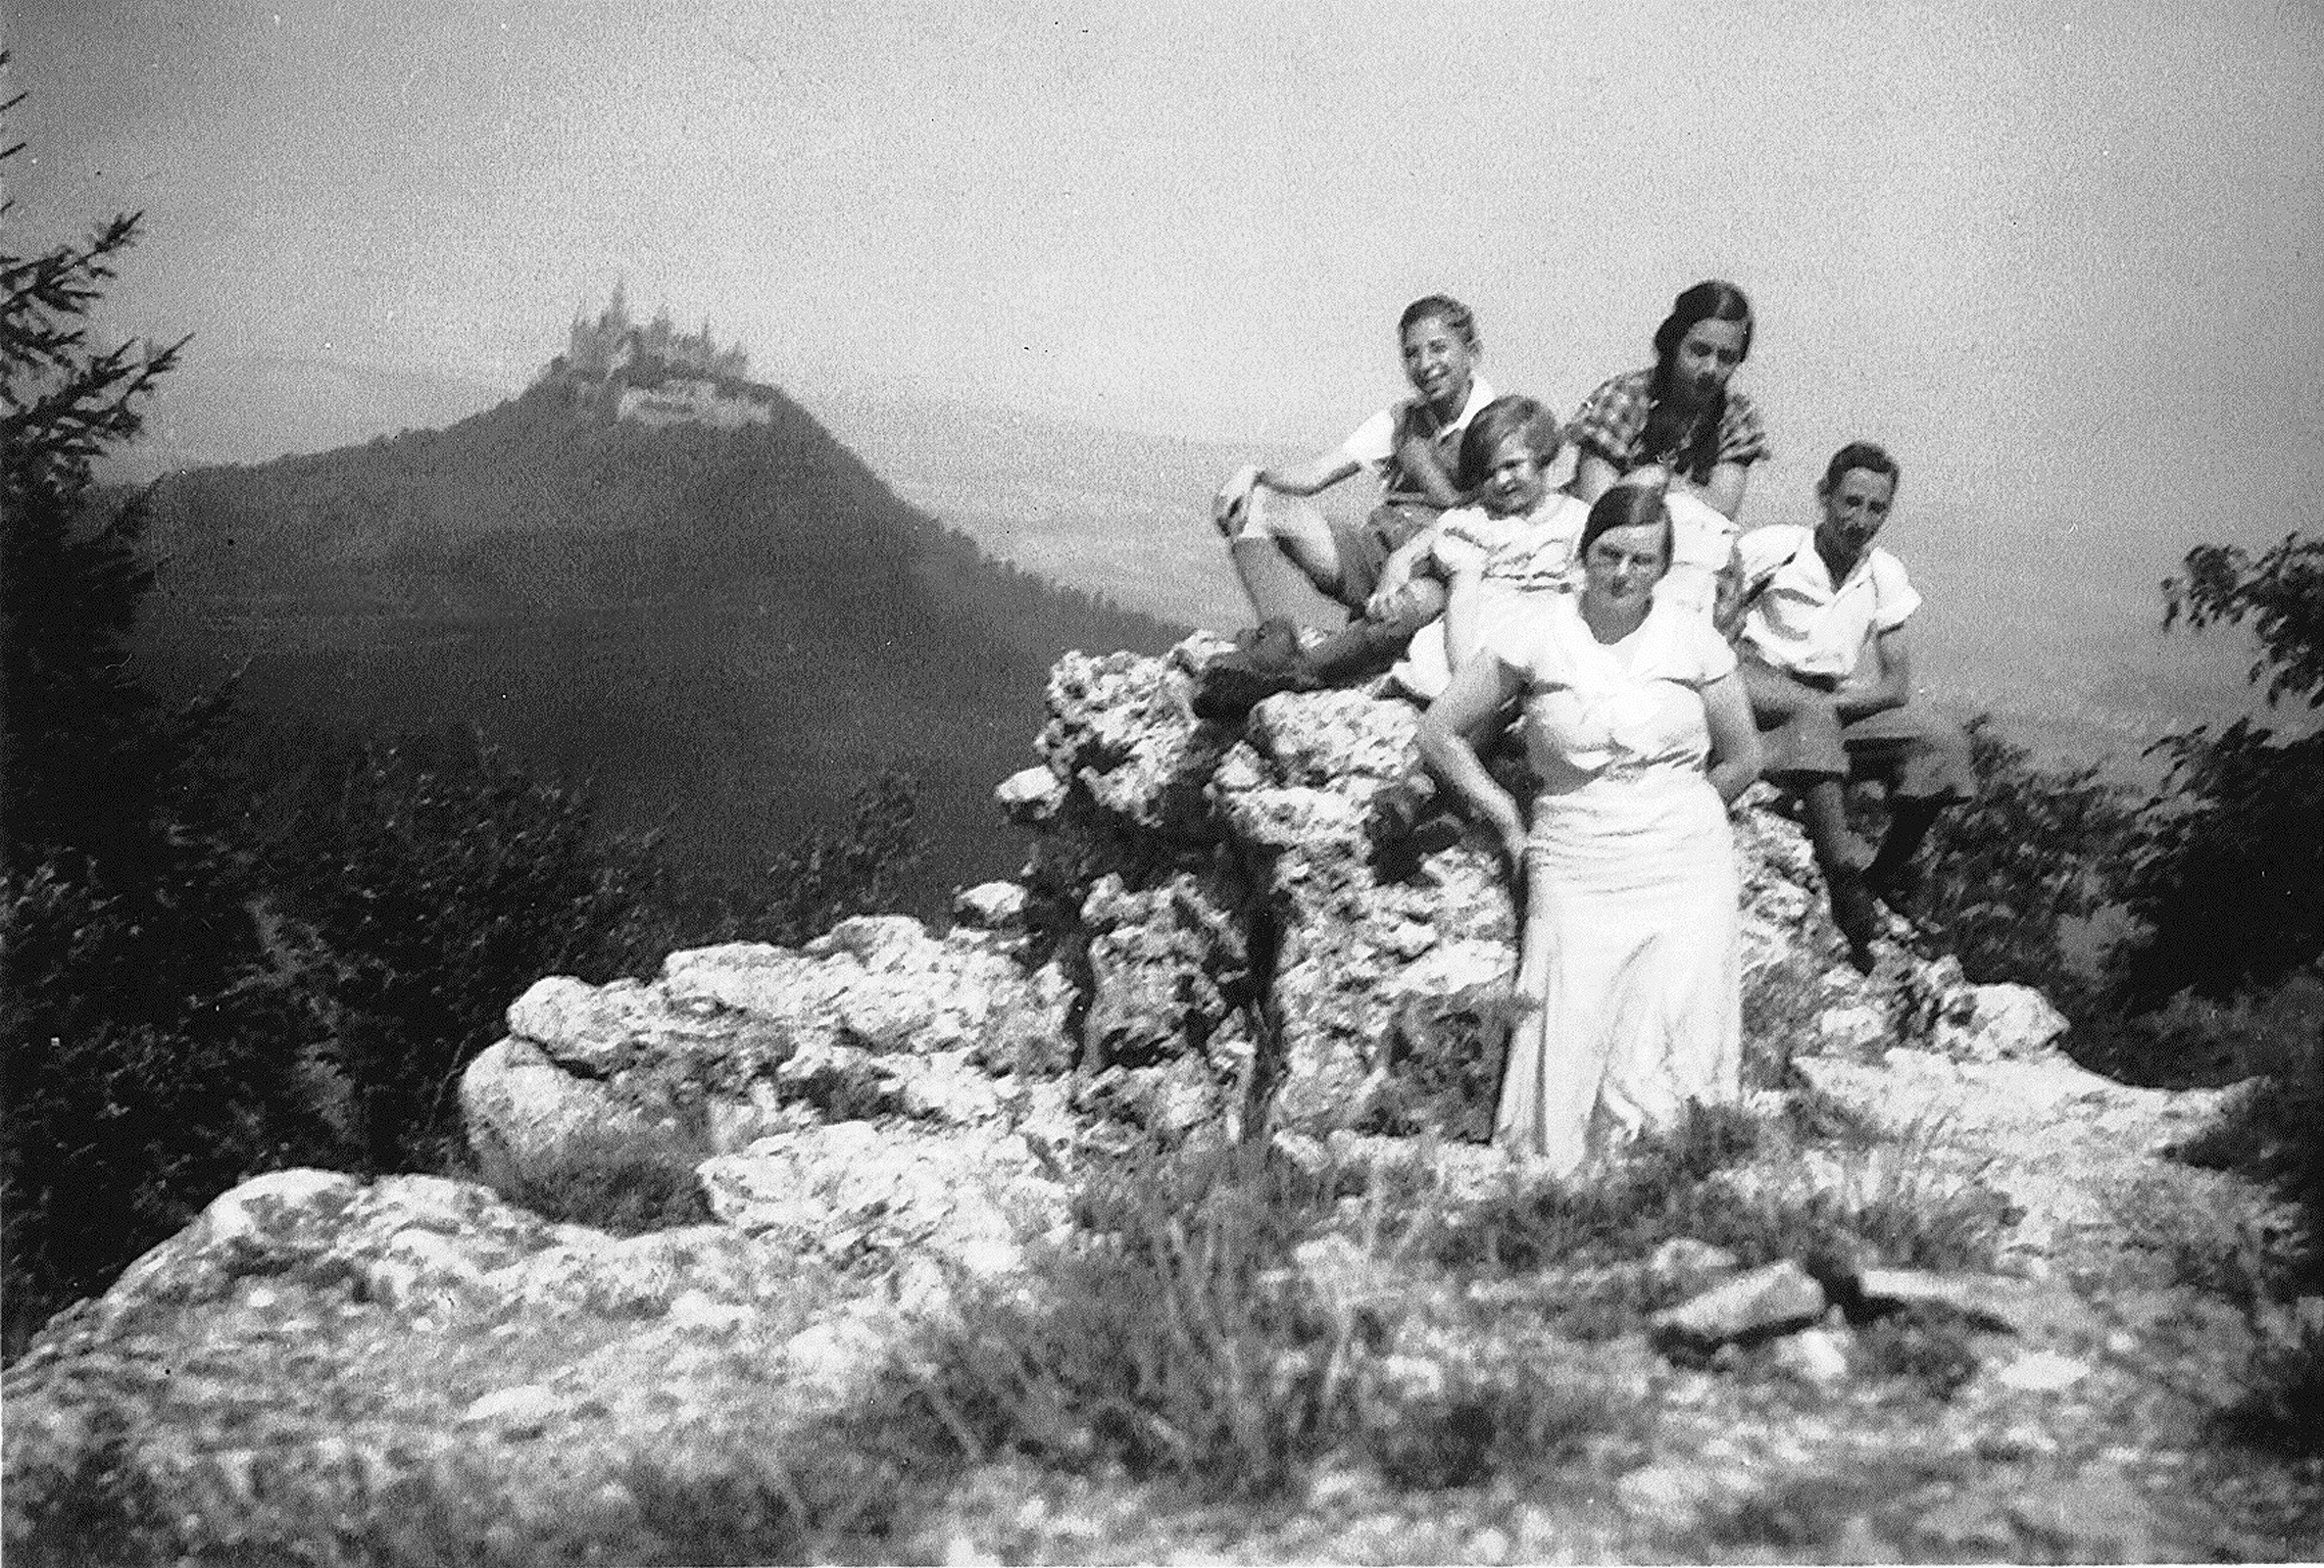 On the Zeller Horn in 1937; in the background: Hohenzollern Castle.